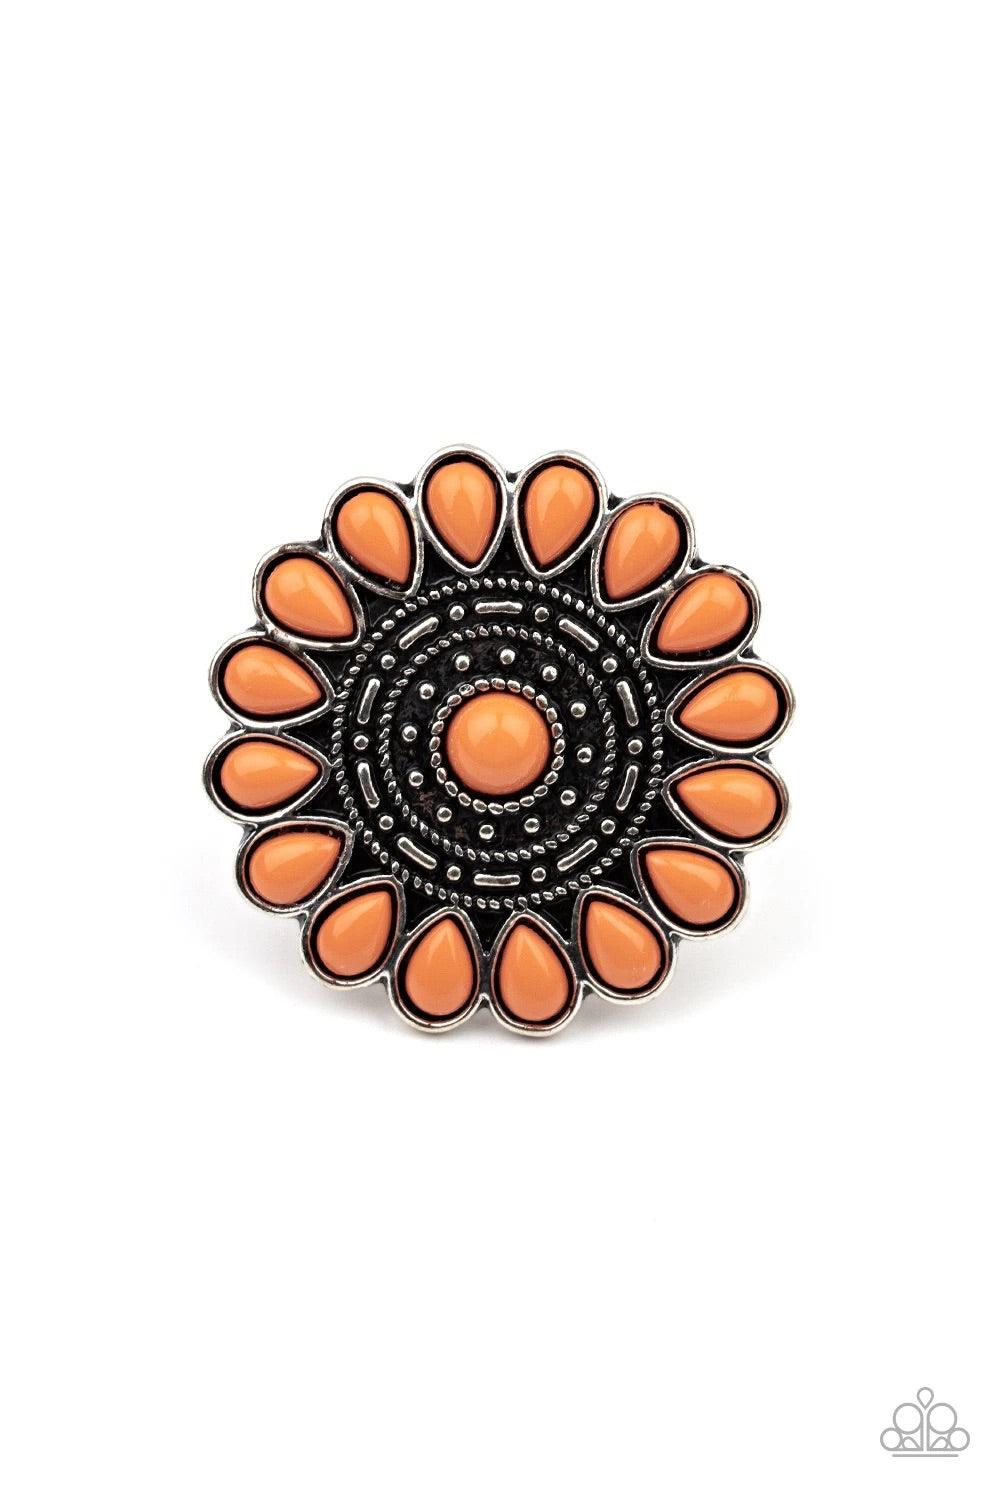 Paparazzi Accessories Posy Paradise - Orange A collection of orange beaded petals flare out from a textured silver center, creating a whimsical flower atop the finger. Features a stretchy band for a flexible fit. Sold as one individual ring. Jewelry